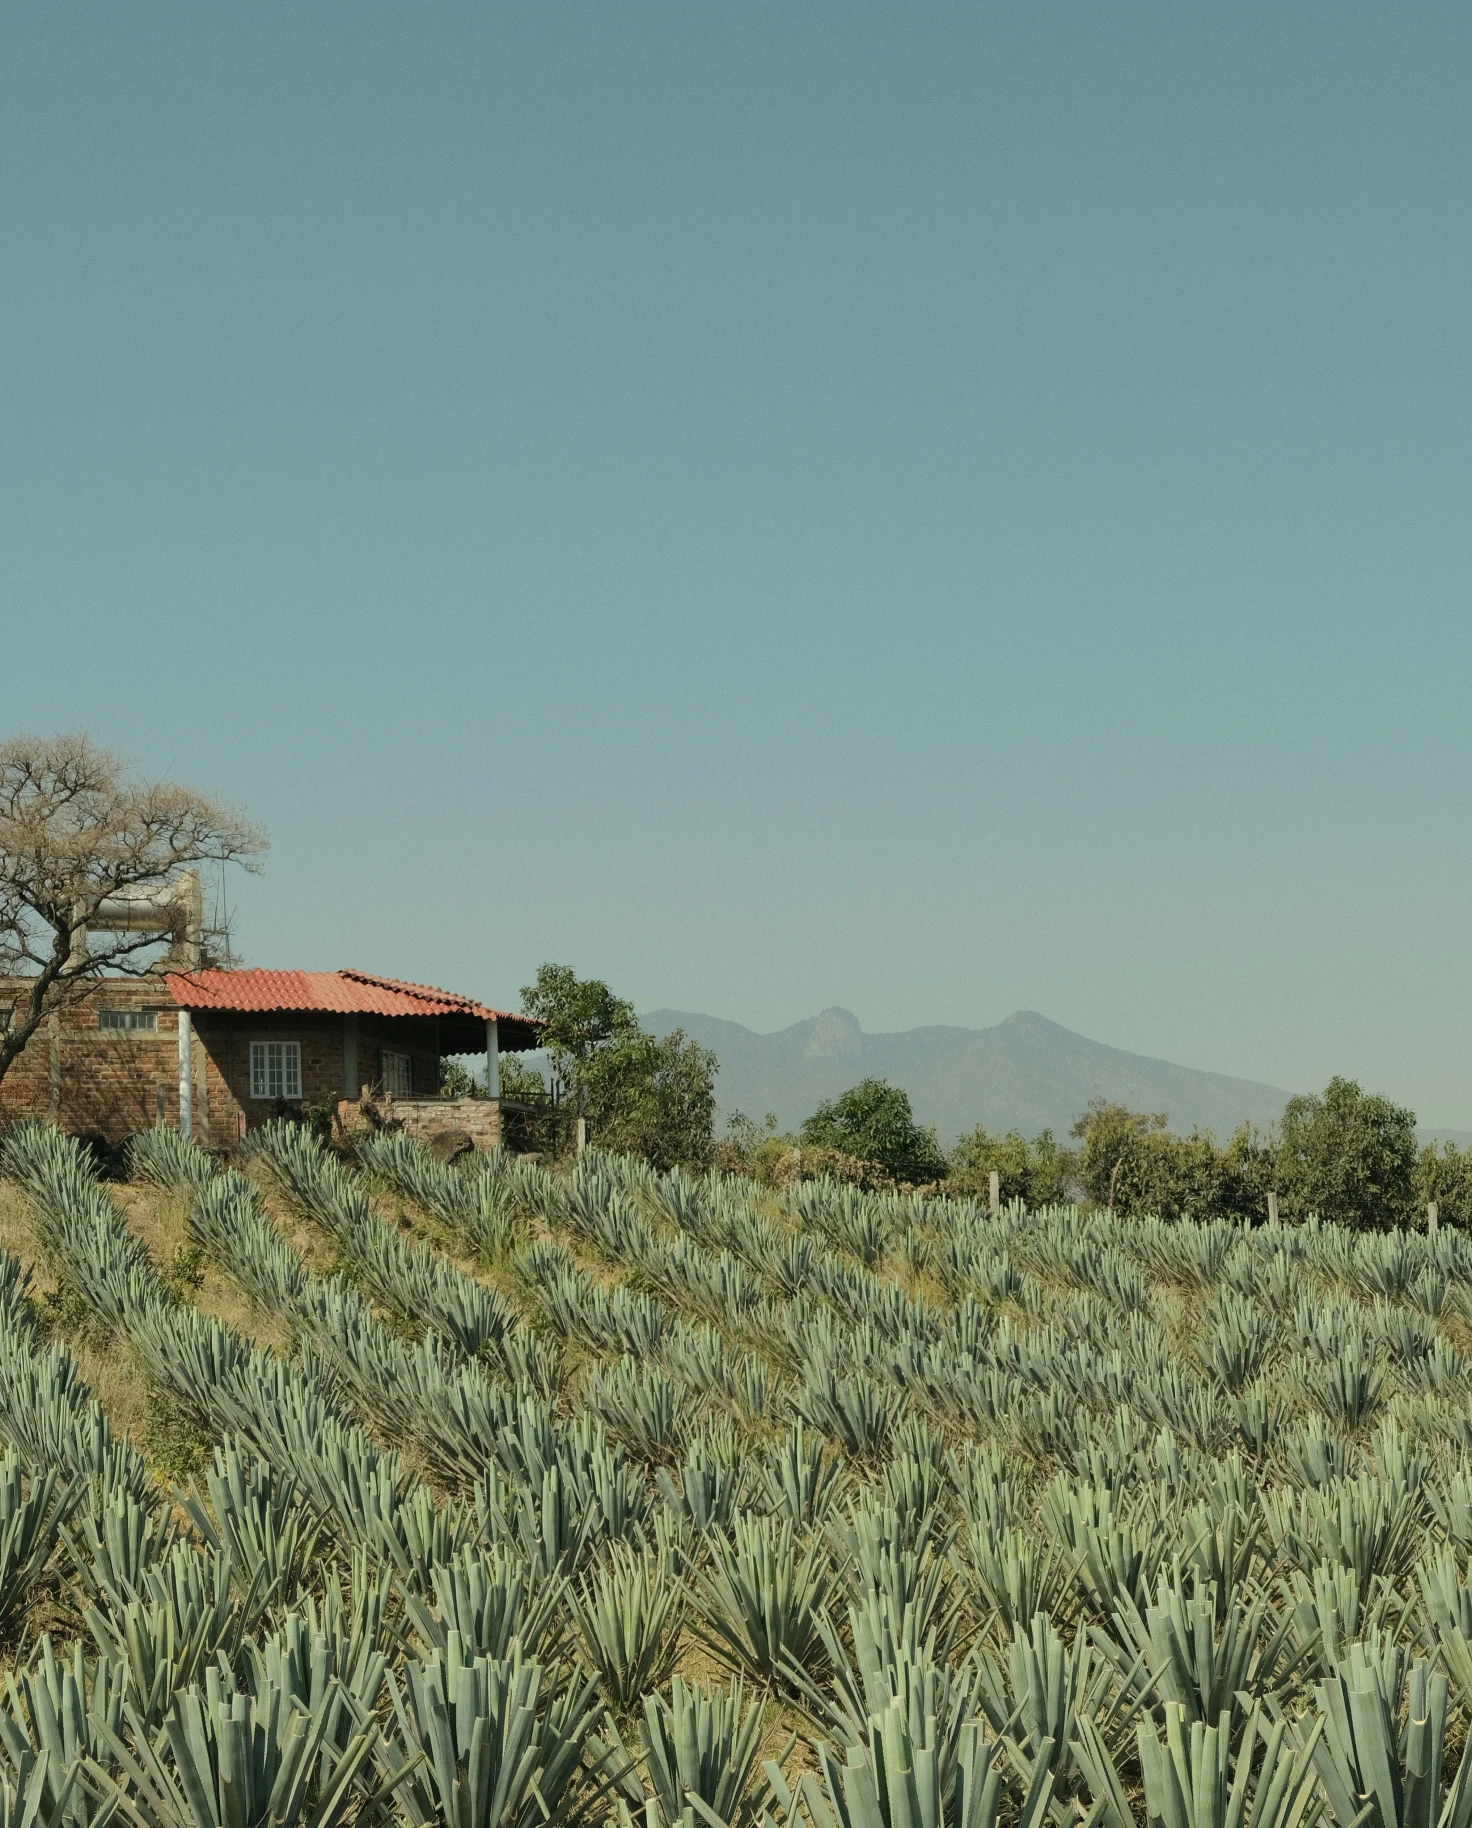 Agave fields in Tequila, Mexico. 